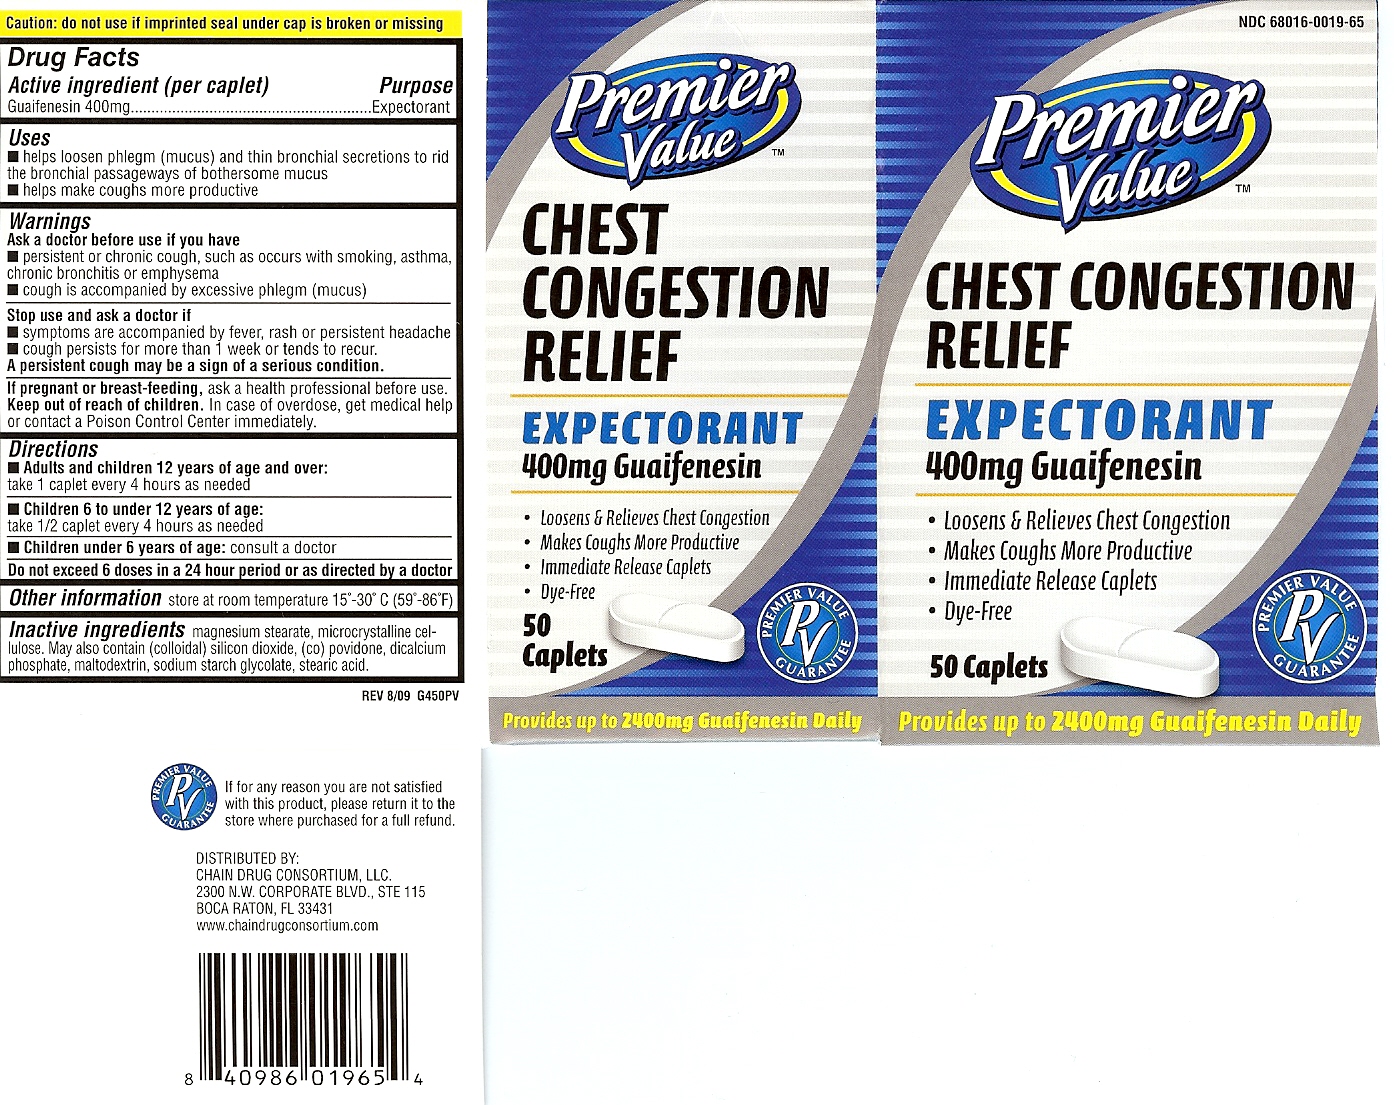 Premier Value Chest Congestion Relief | Guaifenesin Tablet Breastfeeding